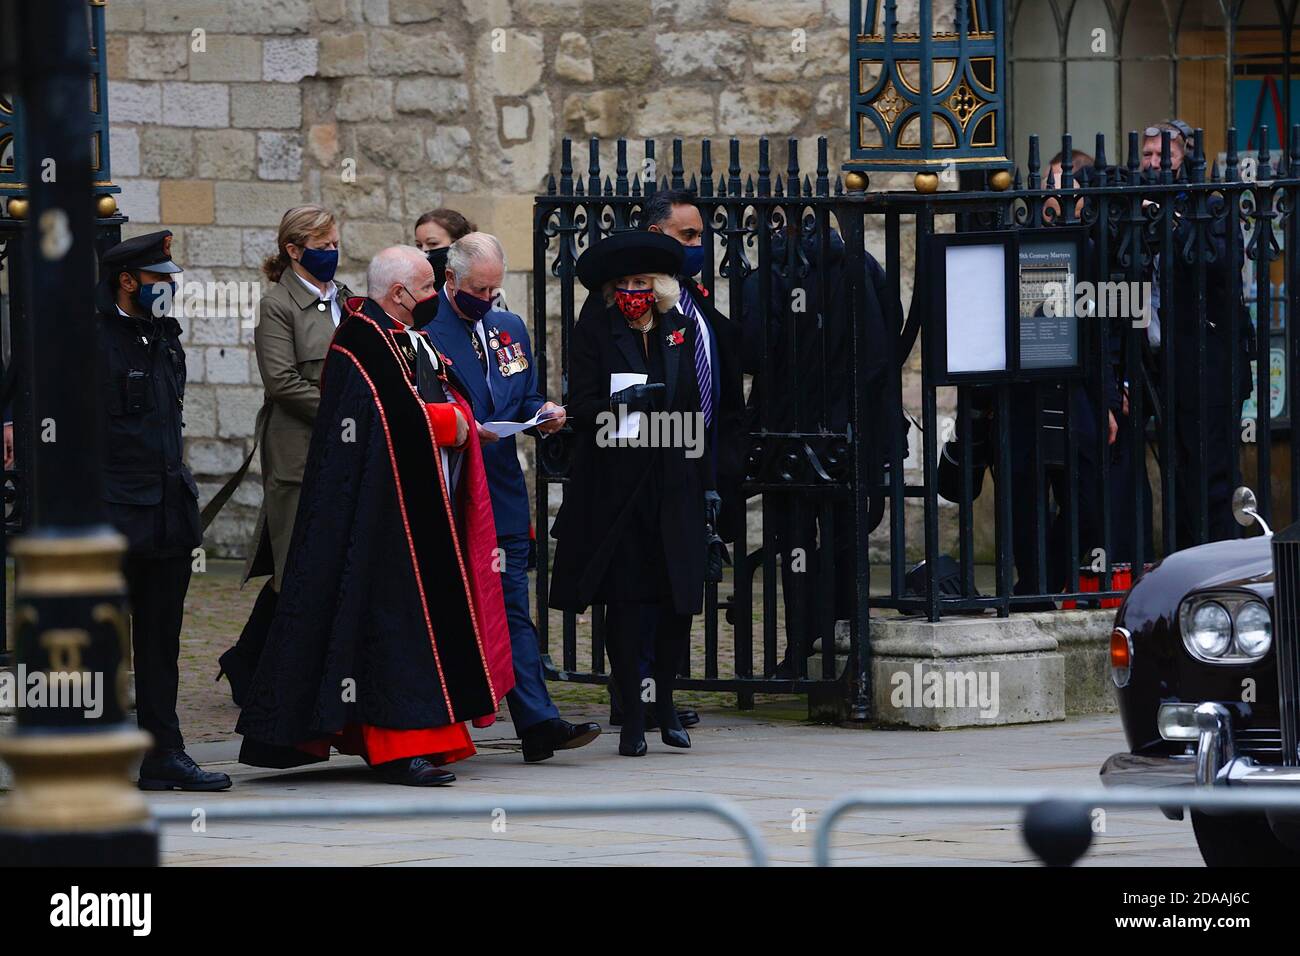 Westminster, London, UK. 11 November, 2020. Remembrance Day in London. HRH Prince Charles and Camilla Parker Bowles exit Westminster Abbey. Photo Credit: Paul Lawrenson-PAL Media/Alamy Live News Stock Photo